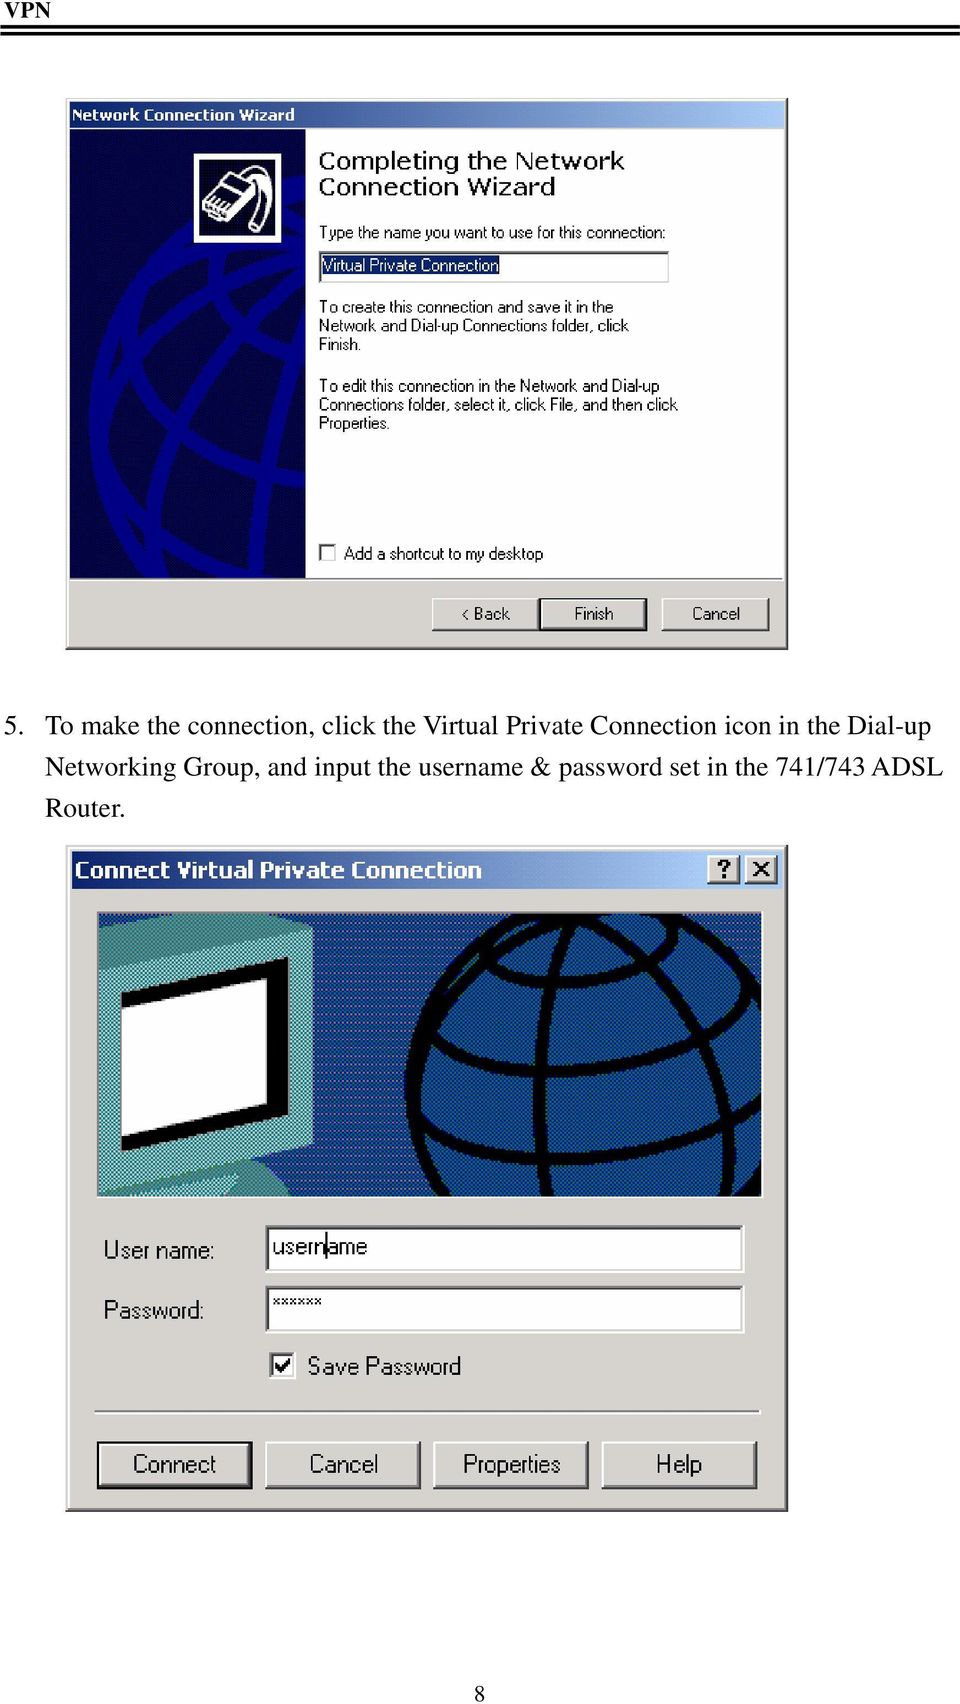 Dial-up Networking Group, and input the